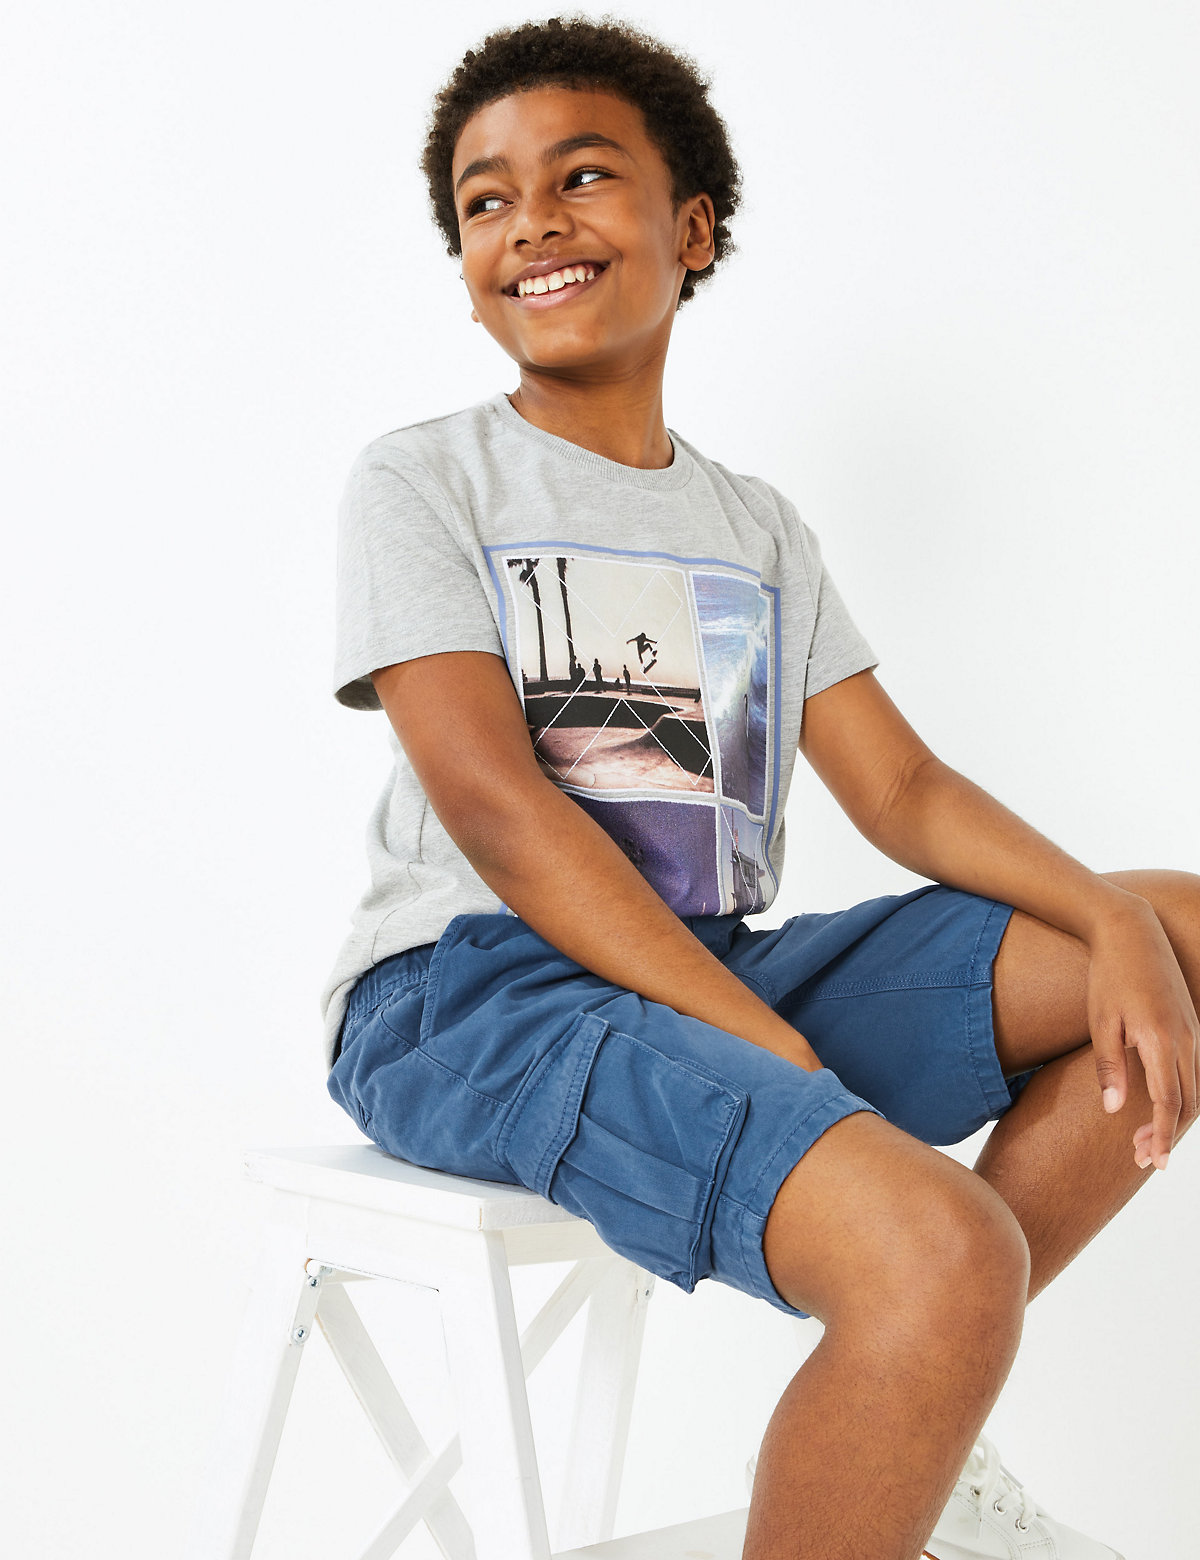 Pure Cotton Utility Buckle Shorts (6-16 Yrs)